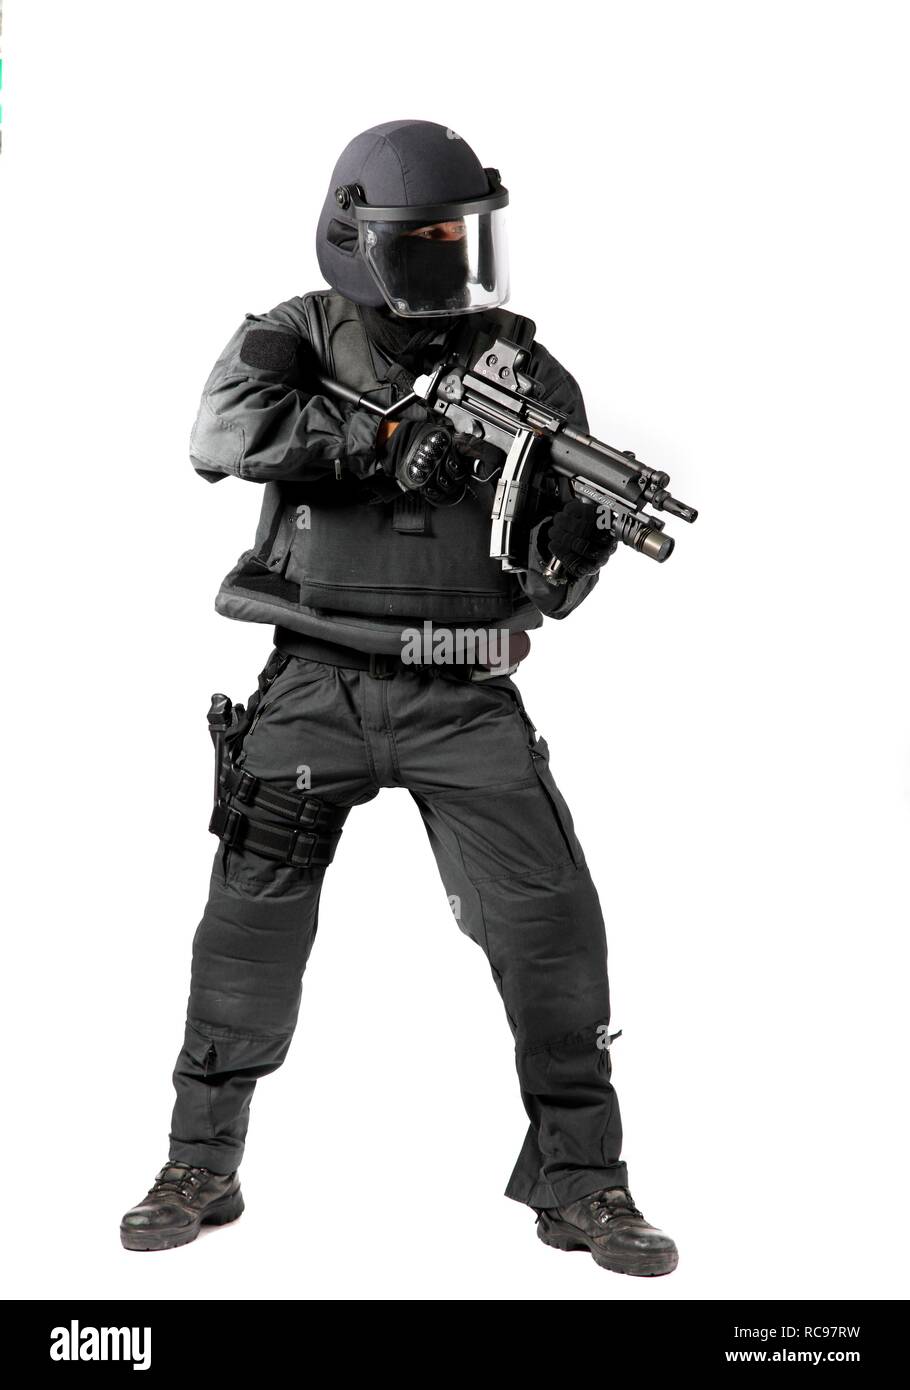 Police, Special Task Force, SEK, officer wearing full protective uniform holding a Heckler & Koch MP5 submachine gun Stock Photo